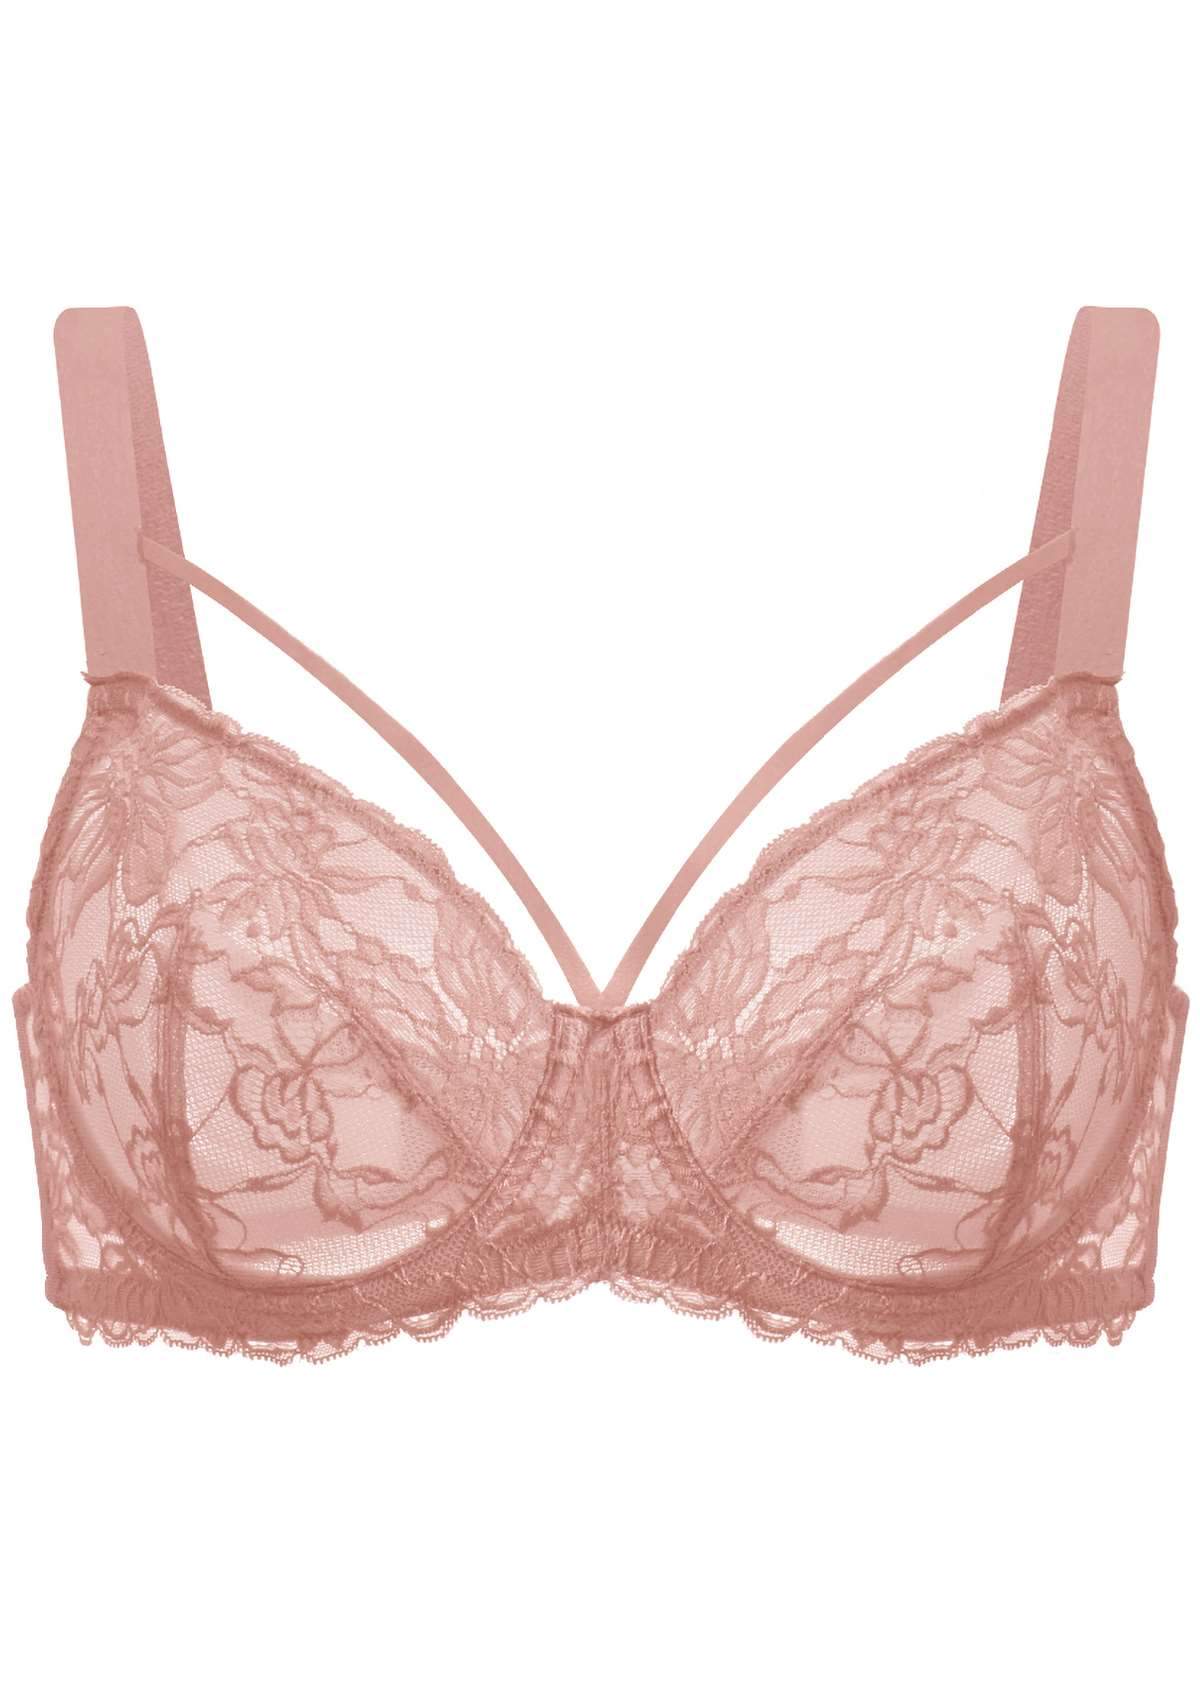 HSIA Pretty In Petals Lace Bra And Panty Sets: Bra For Big Boobs - Light Coral / 42 / D